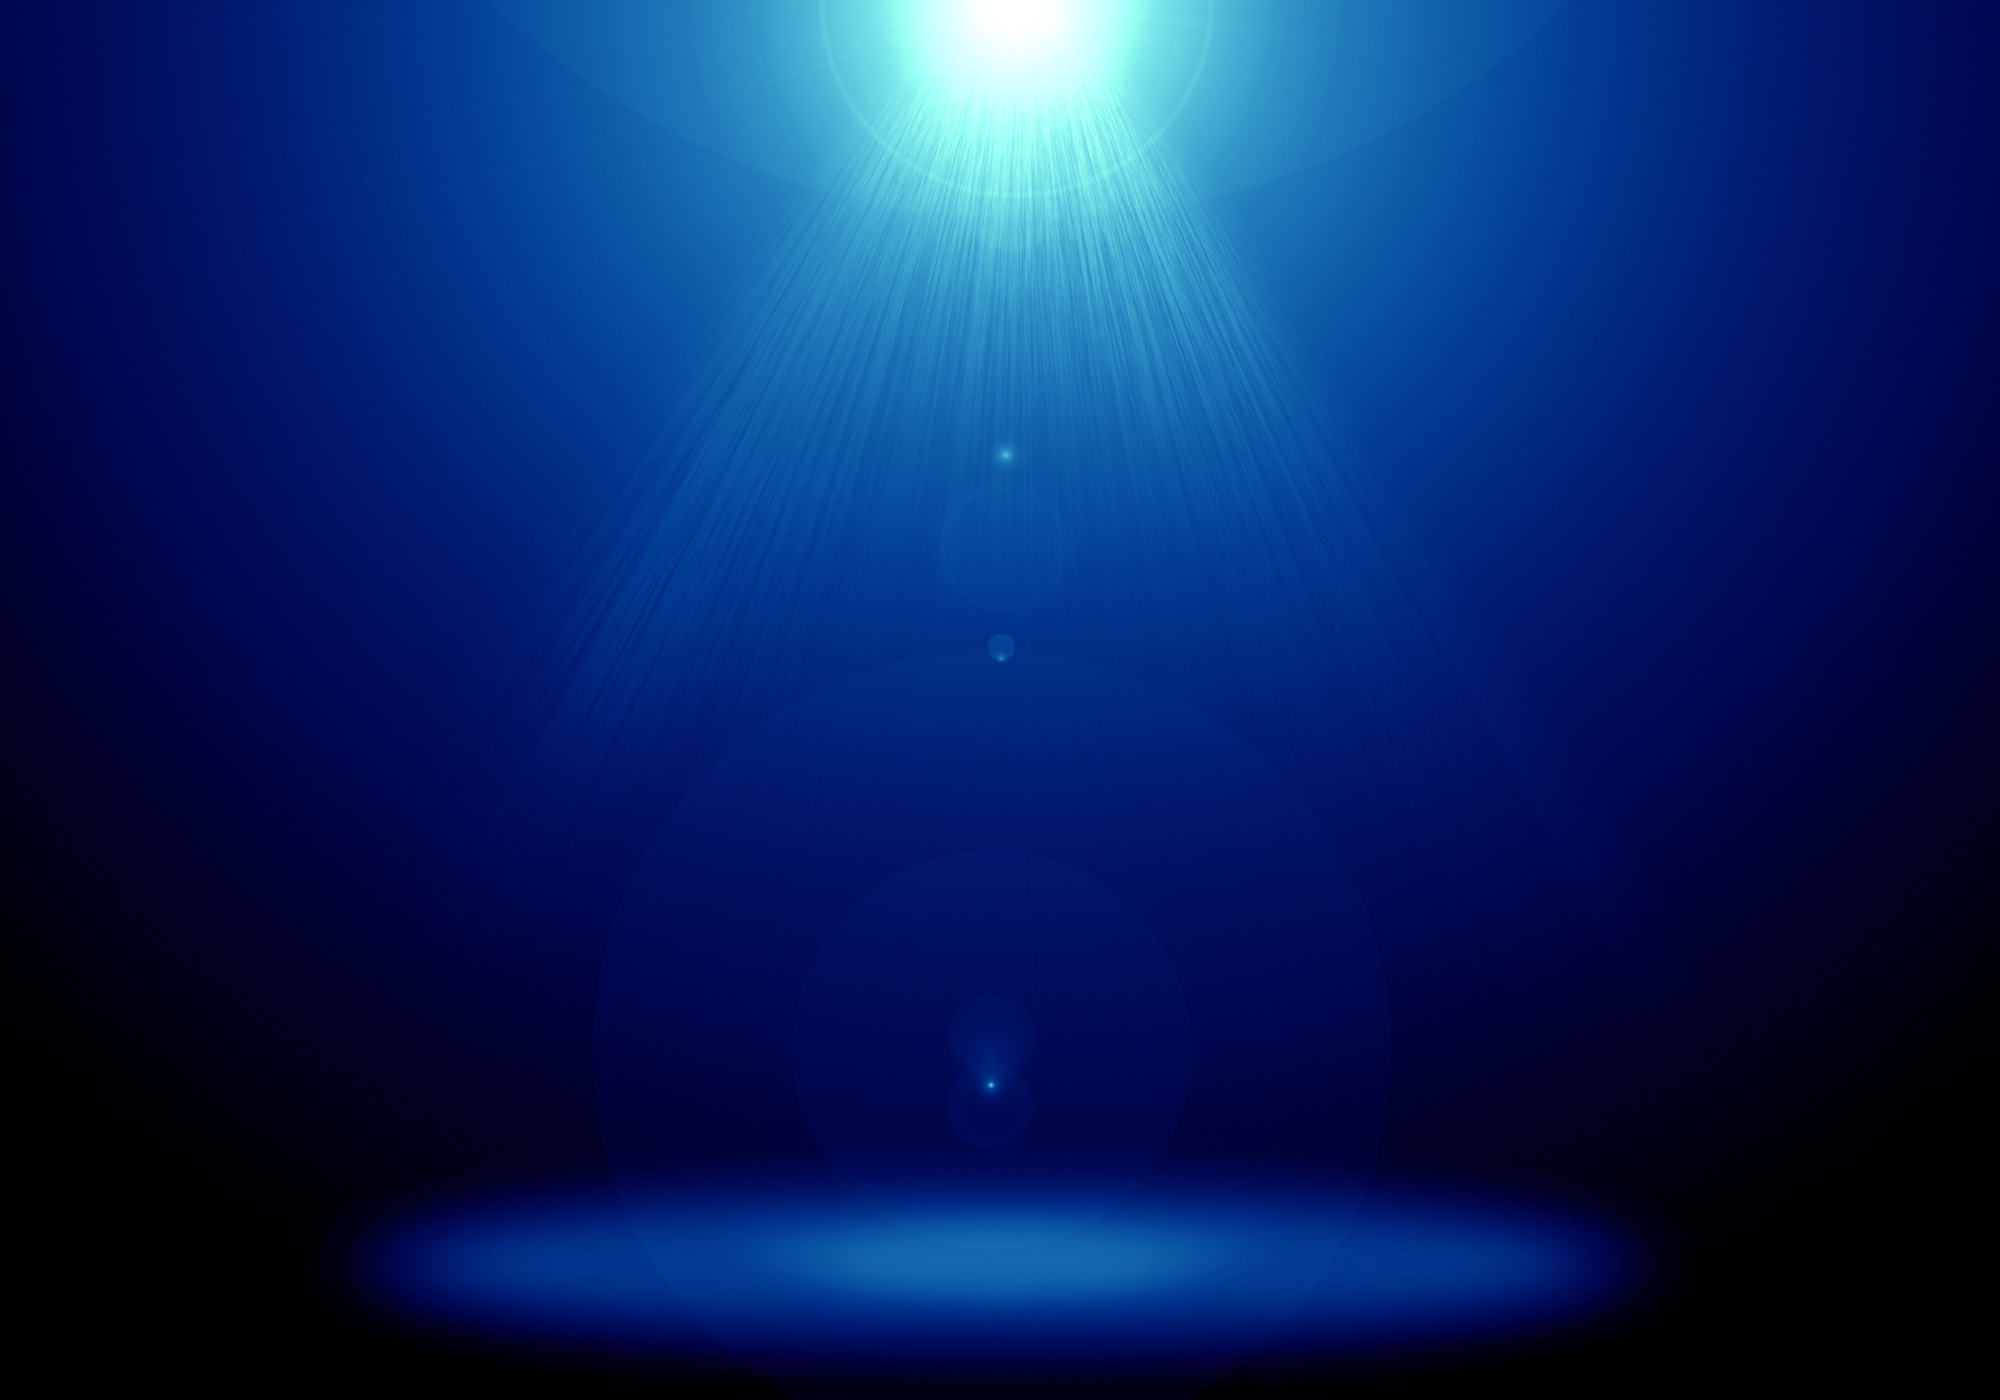 Abstract Image of Blue Lighting Flare on the Floor Stage.